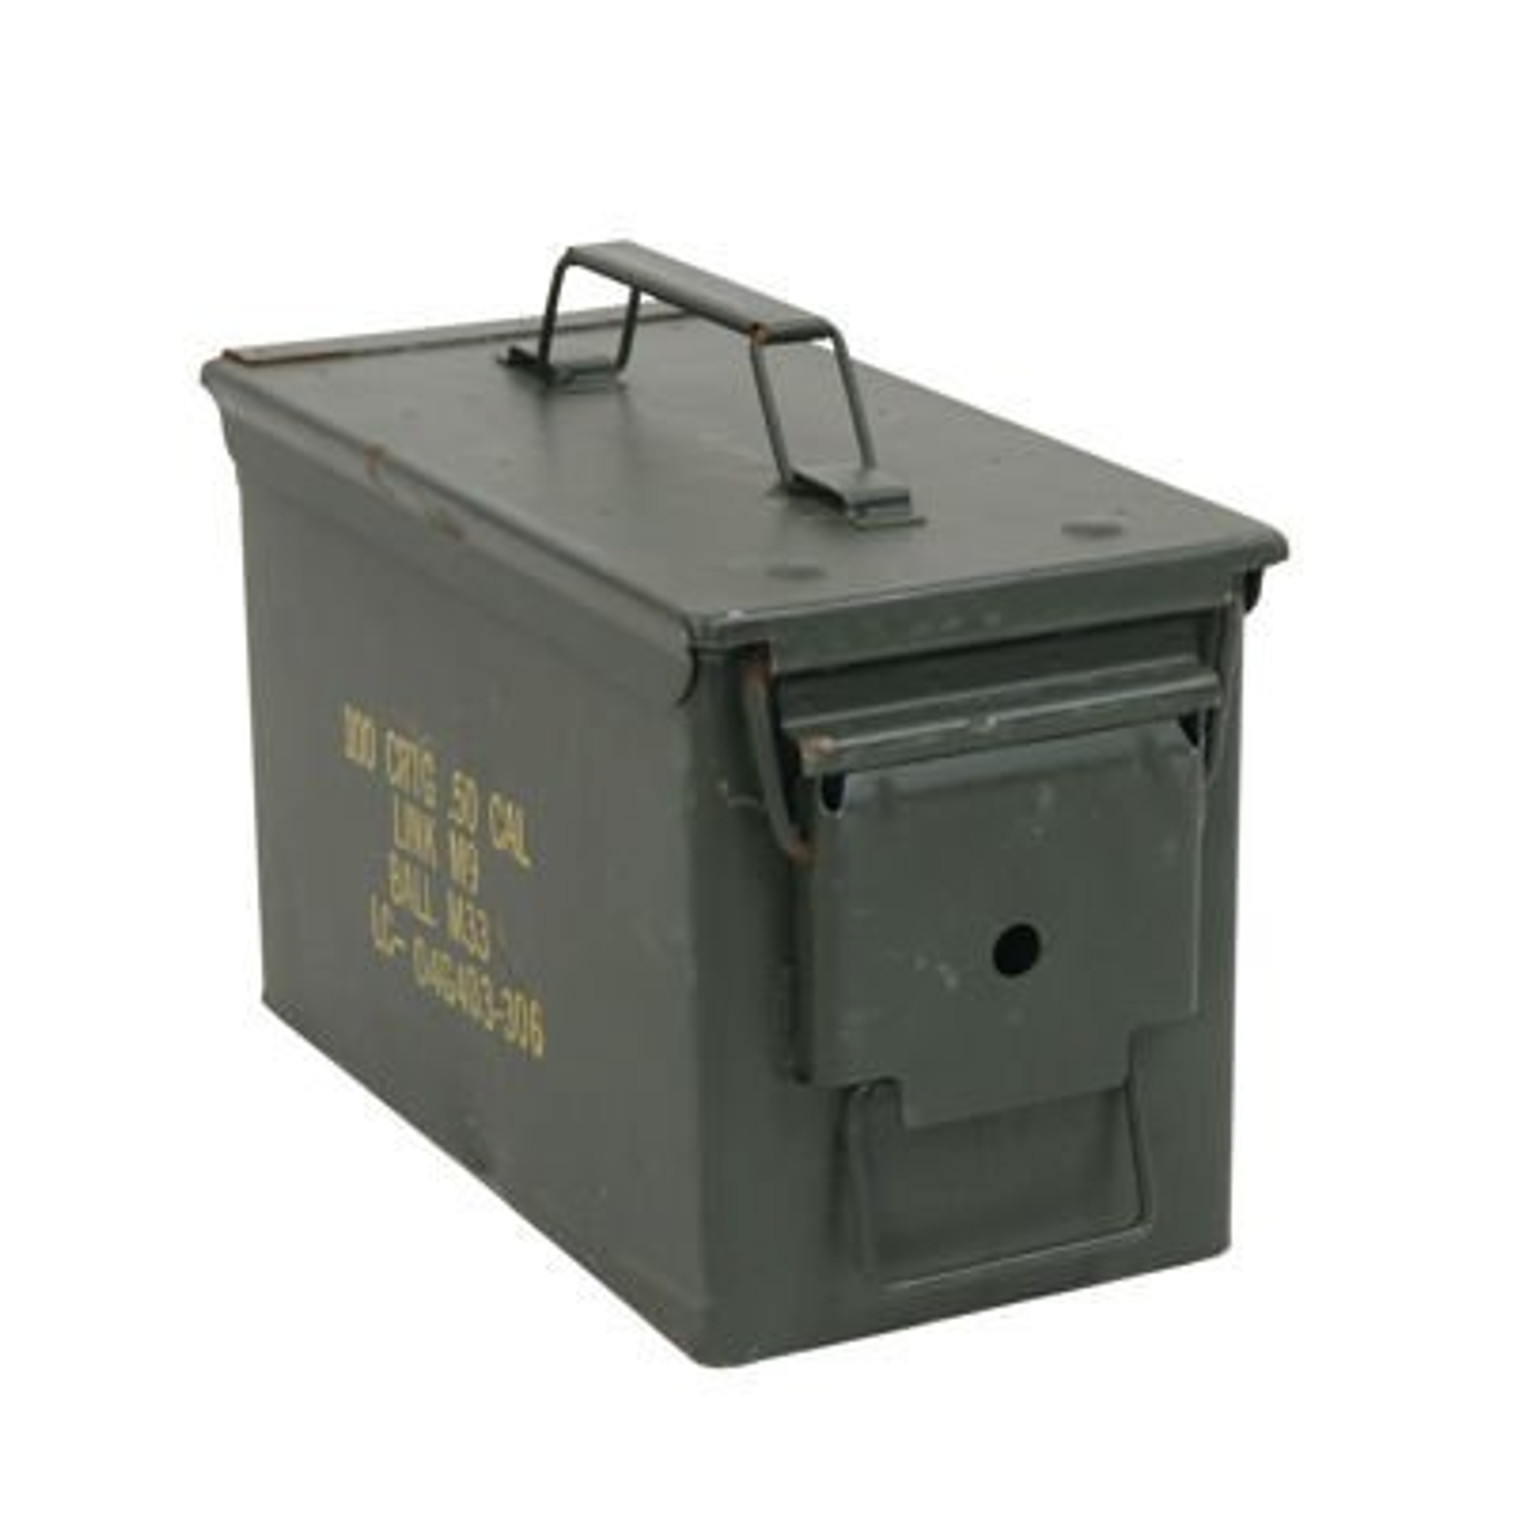 U.S. Armed Forces .50 Caliber Ammo Can